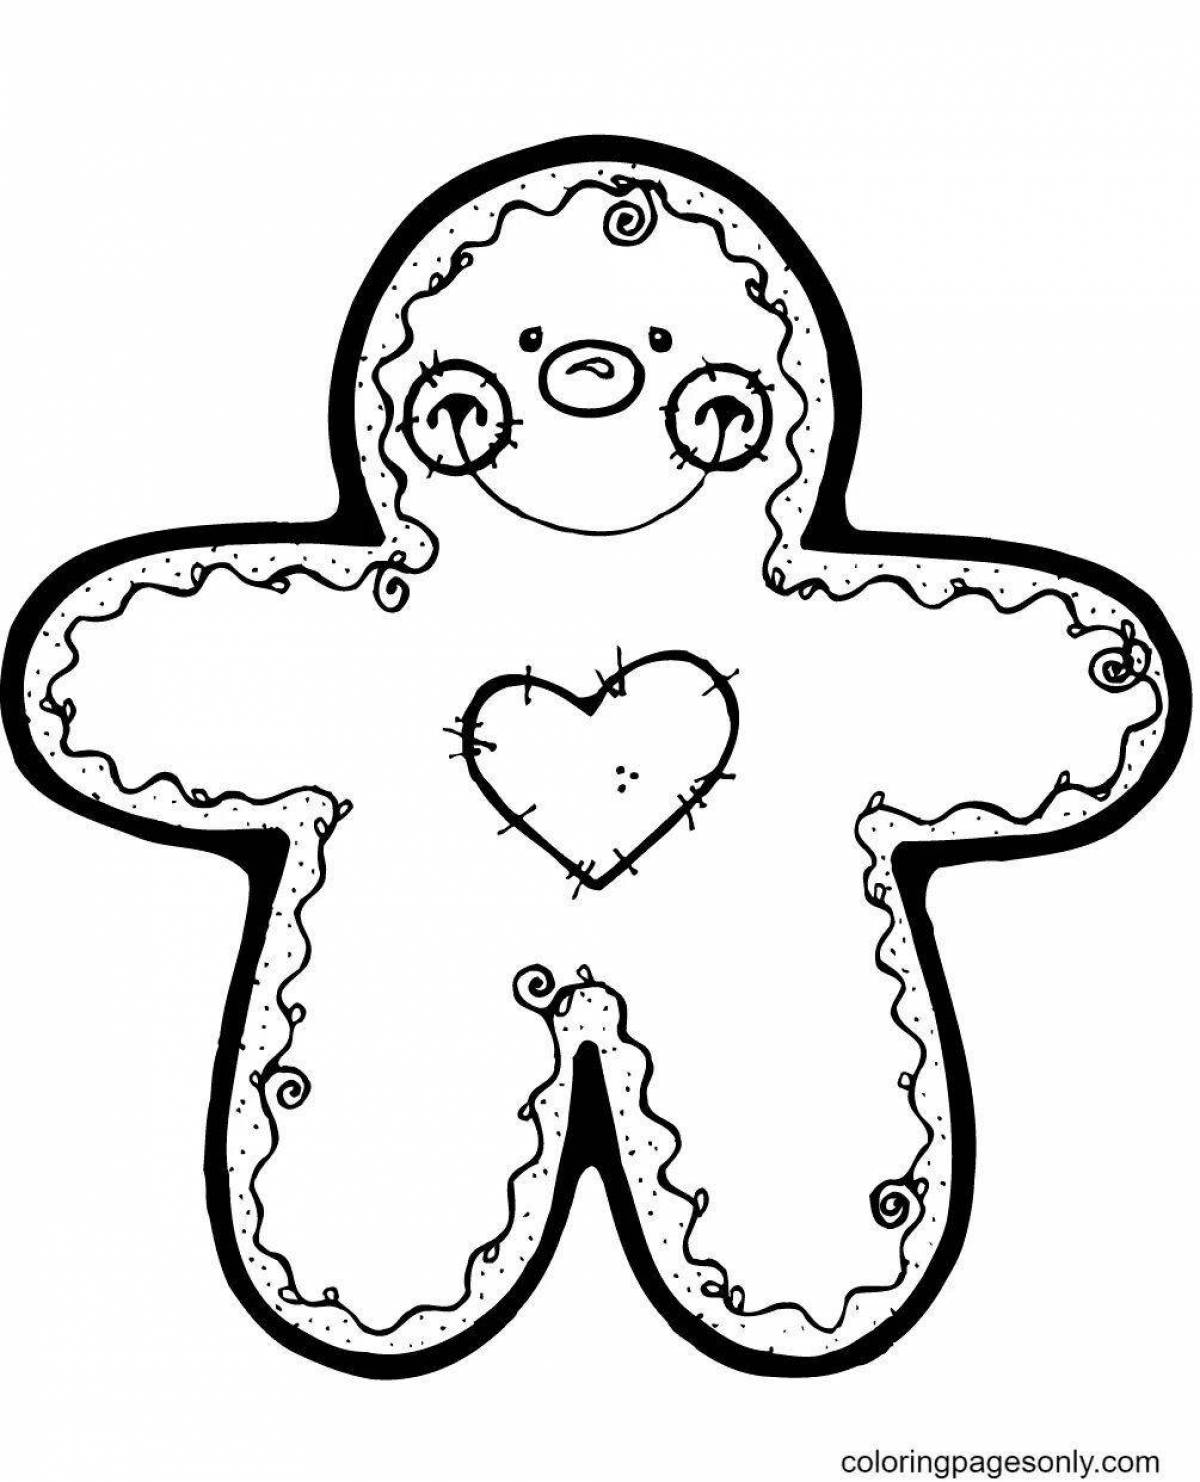 Creative gingerbread coloring for kids